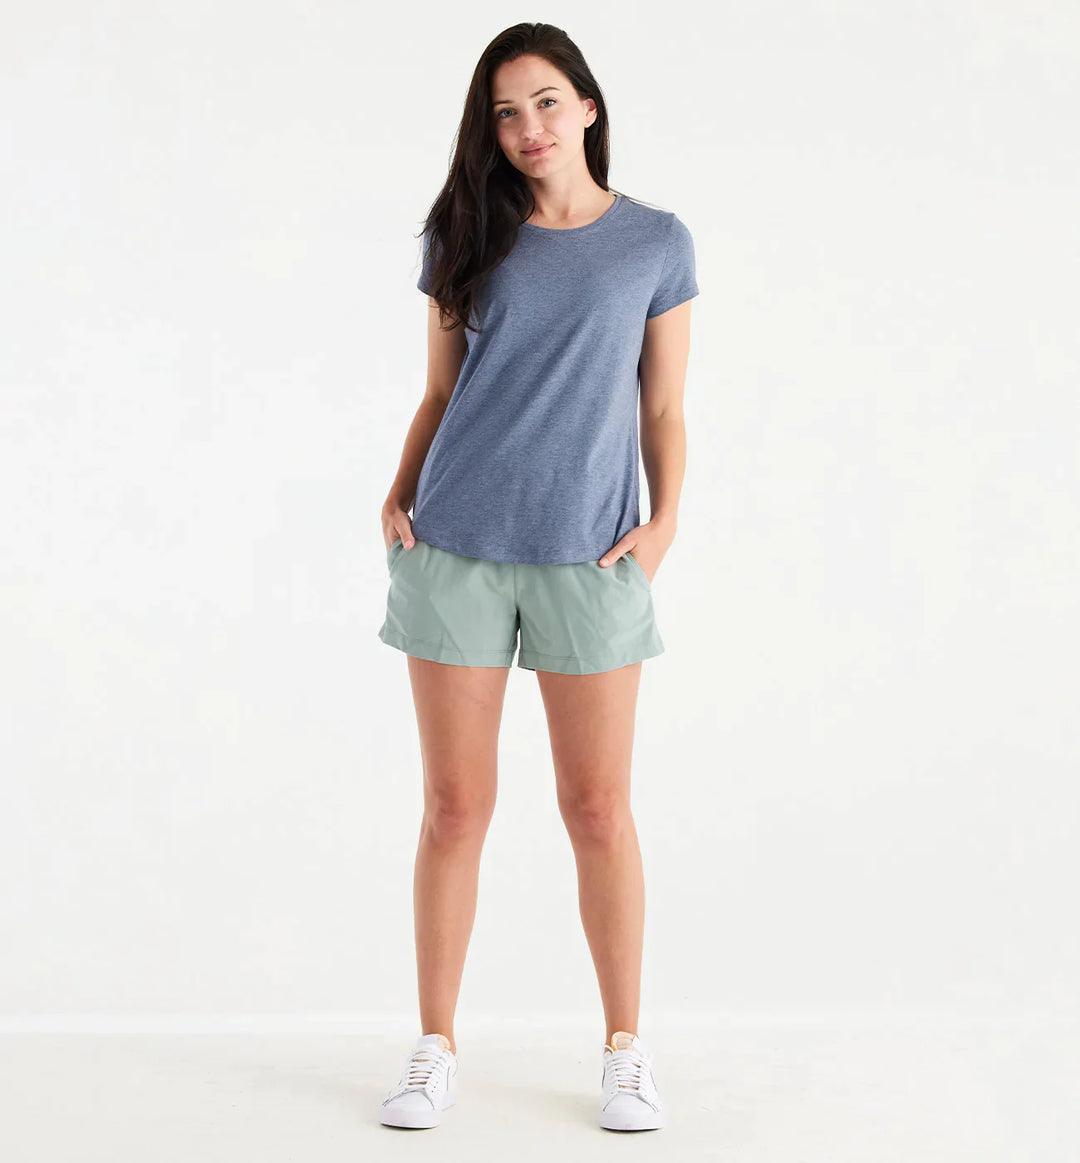 Free Fly - Free Fly Women’s Bamboo Current Tee - The Shoe Collective